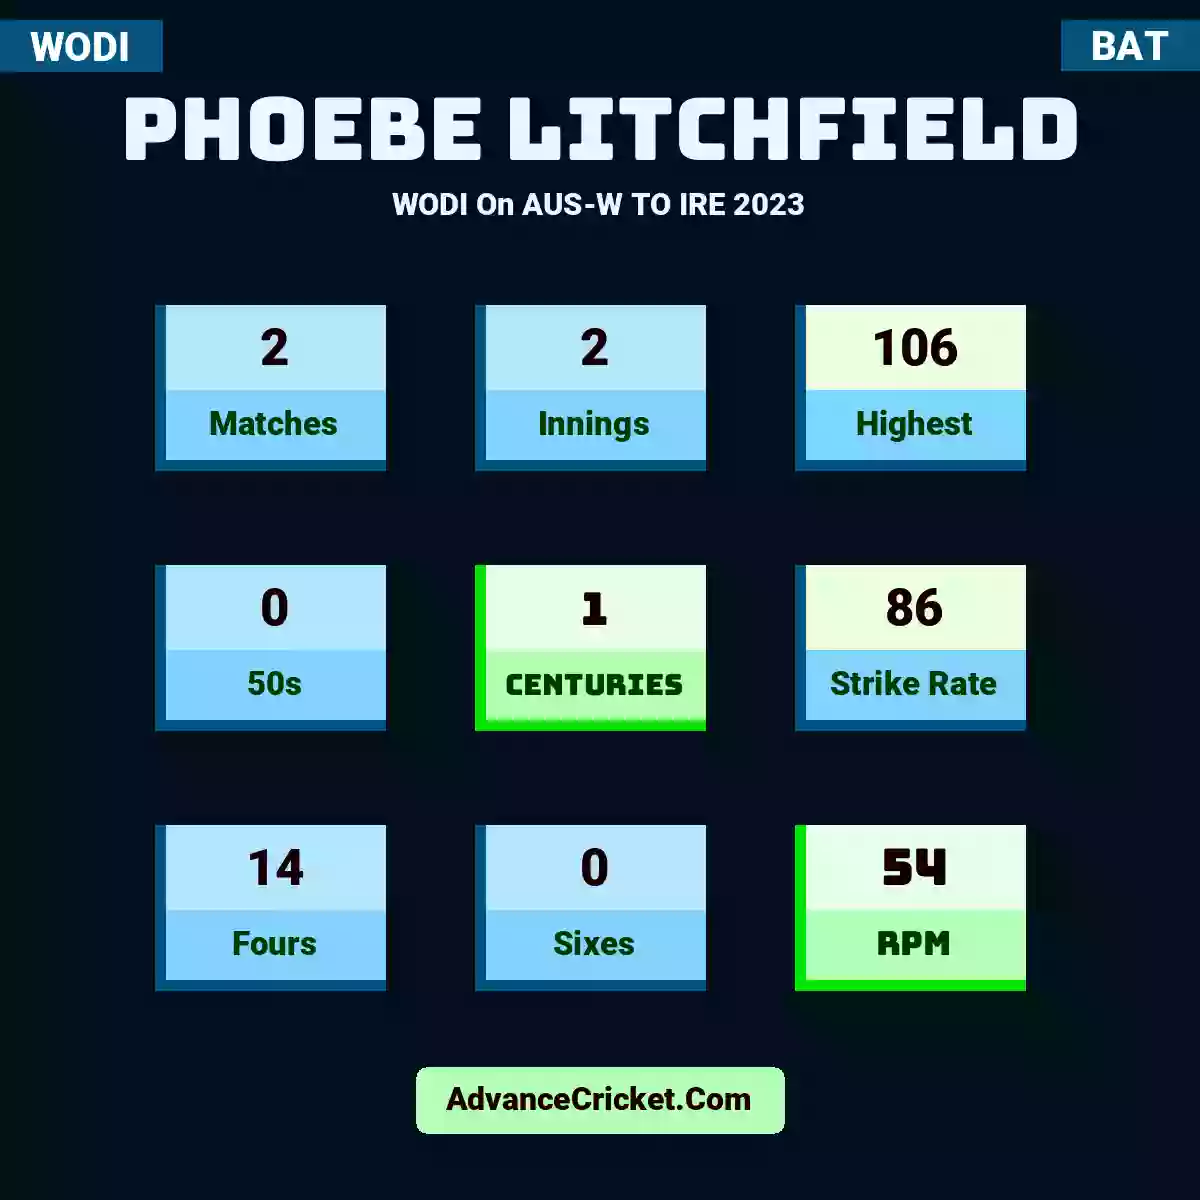 Phoebe Litchfield WODI  On AUS-W TO IRE 2023, Phoebe Litchfield played 2 matches, scored 106 runs as highest, 0 half-centuries, and 1 centuries, with a strike rate of 86. P.Litchfield hit 14 fours and 0 sixes, with an RPM of 54.